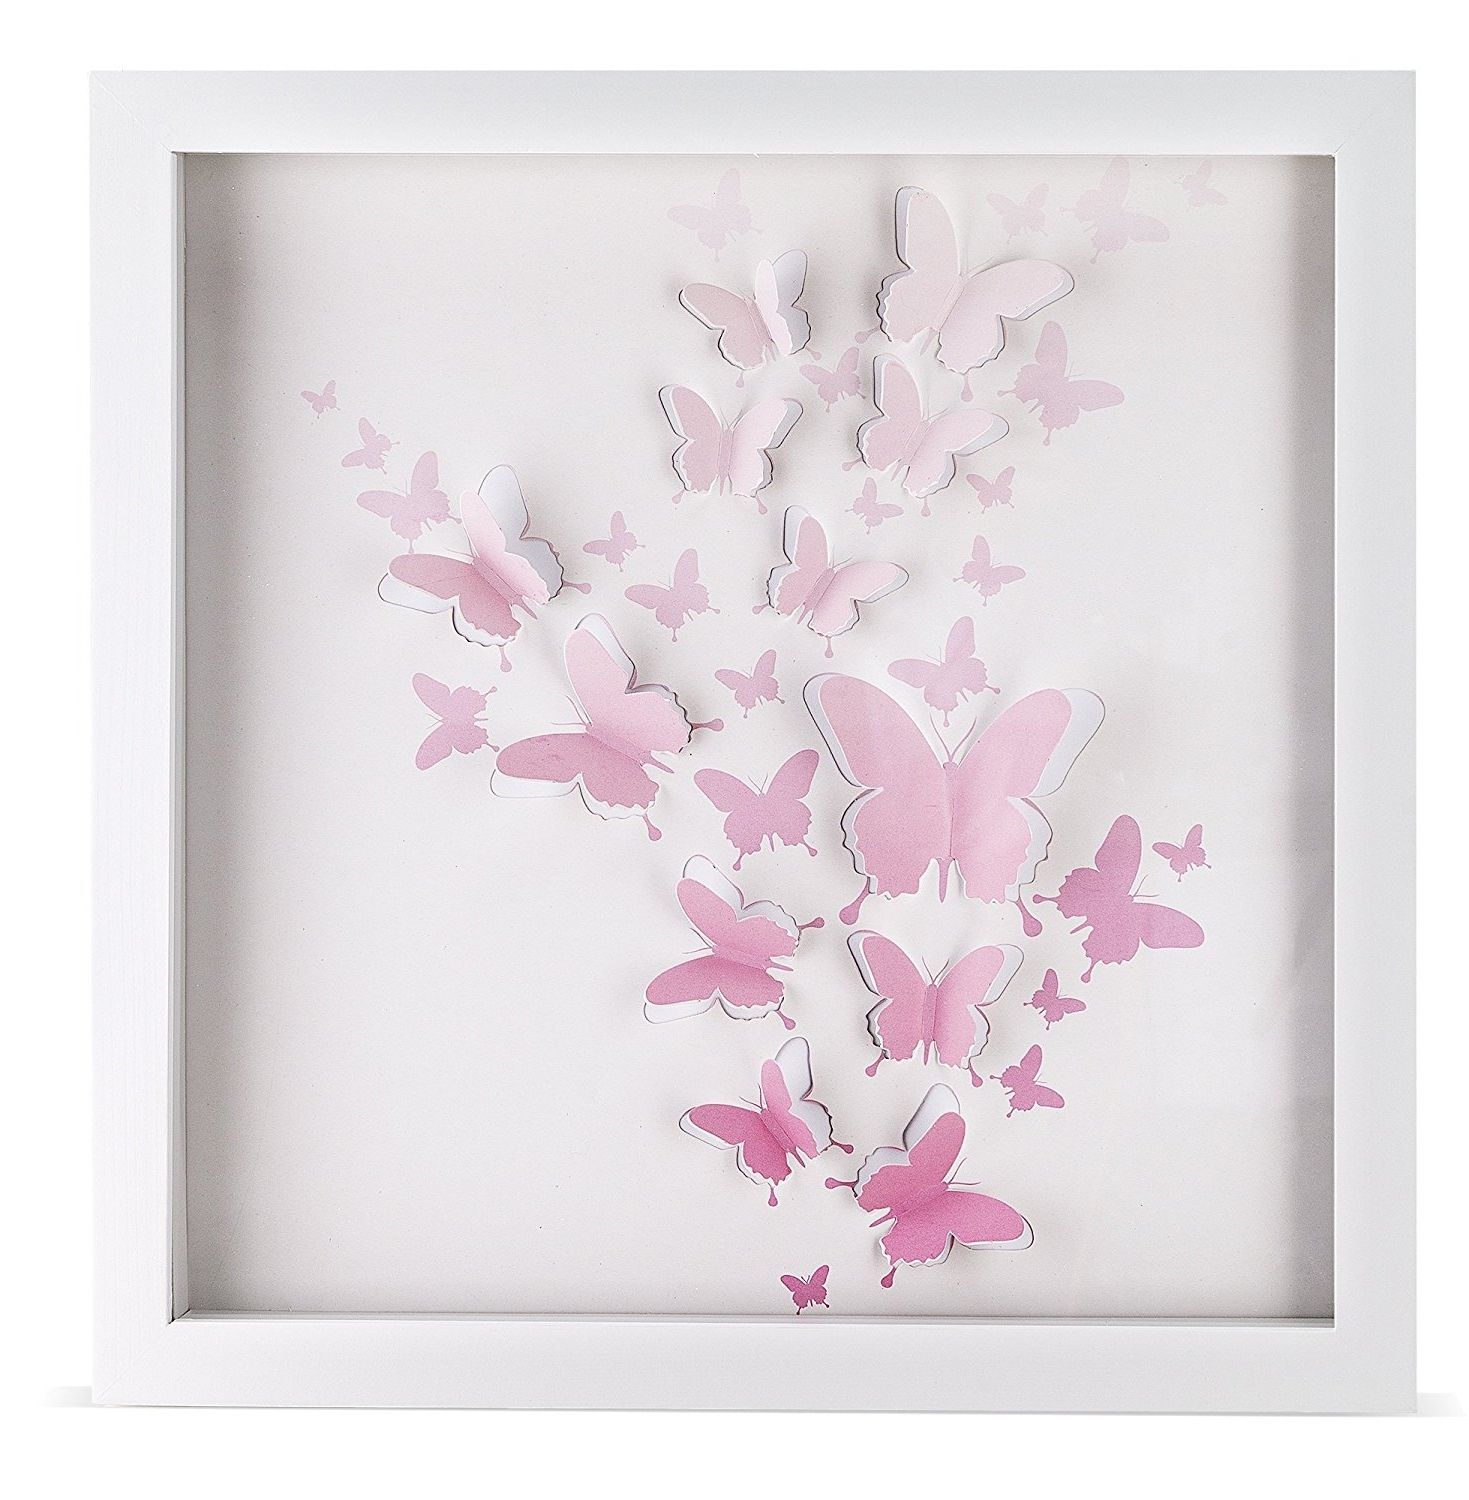 The 15 Best Collection of 3d Butterfly Framed Wall Art